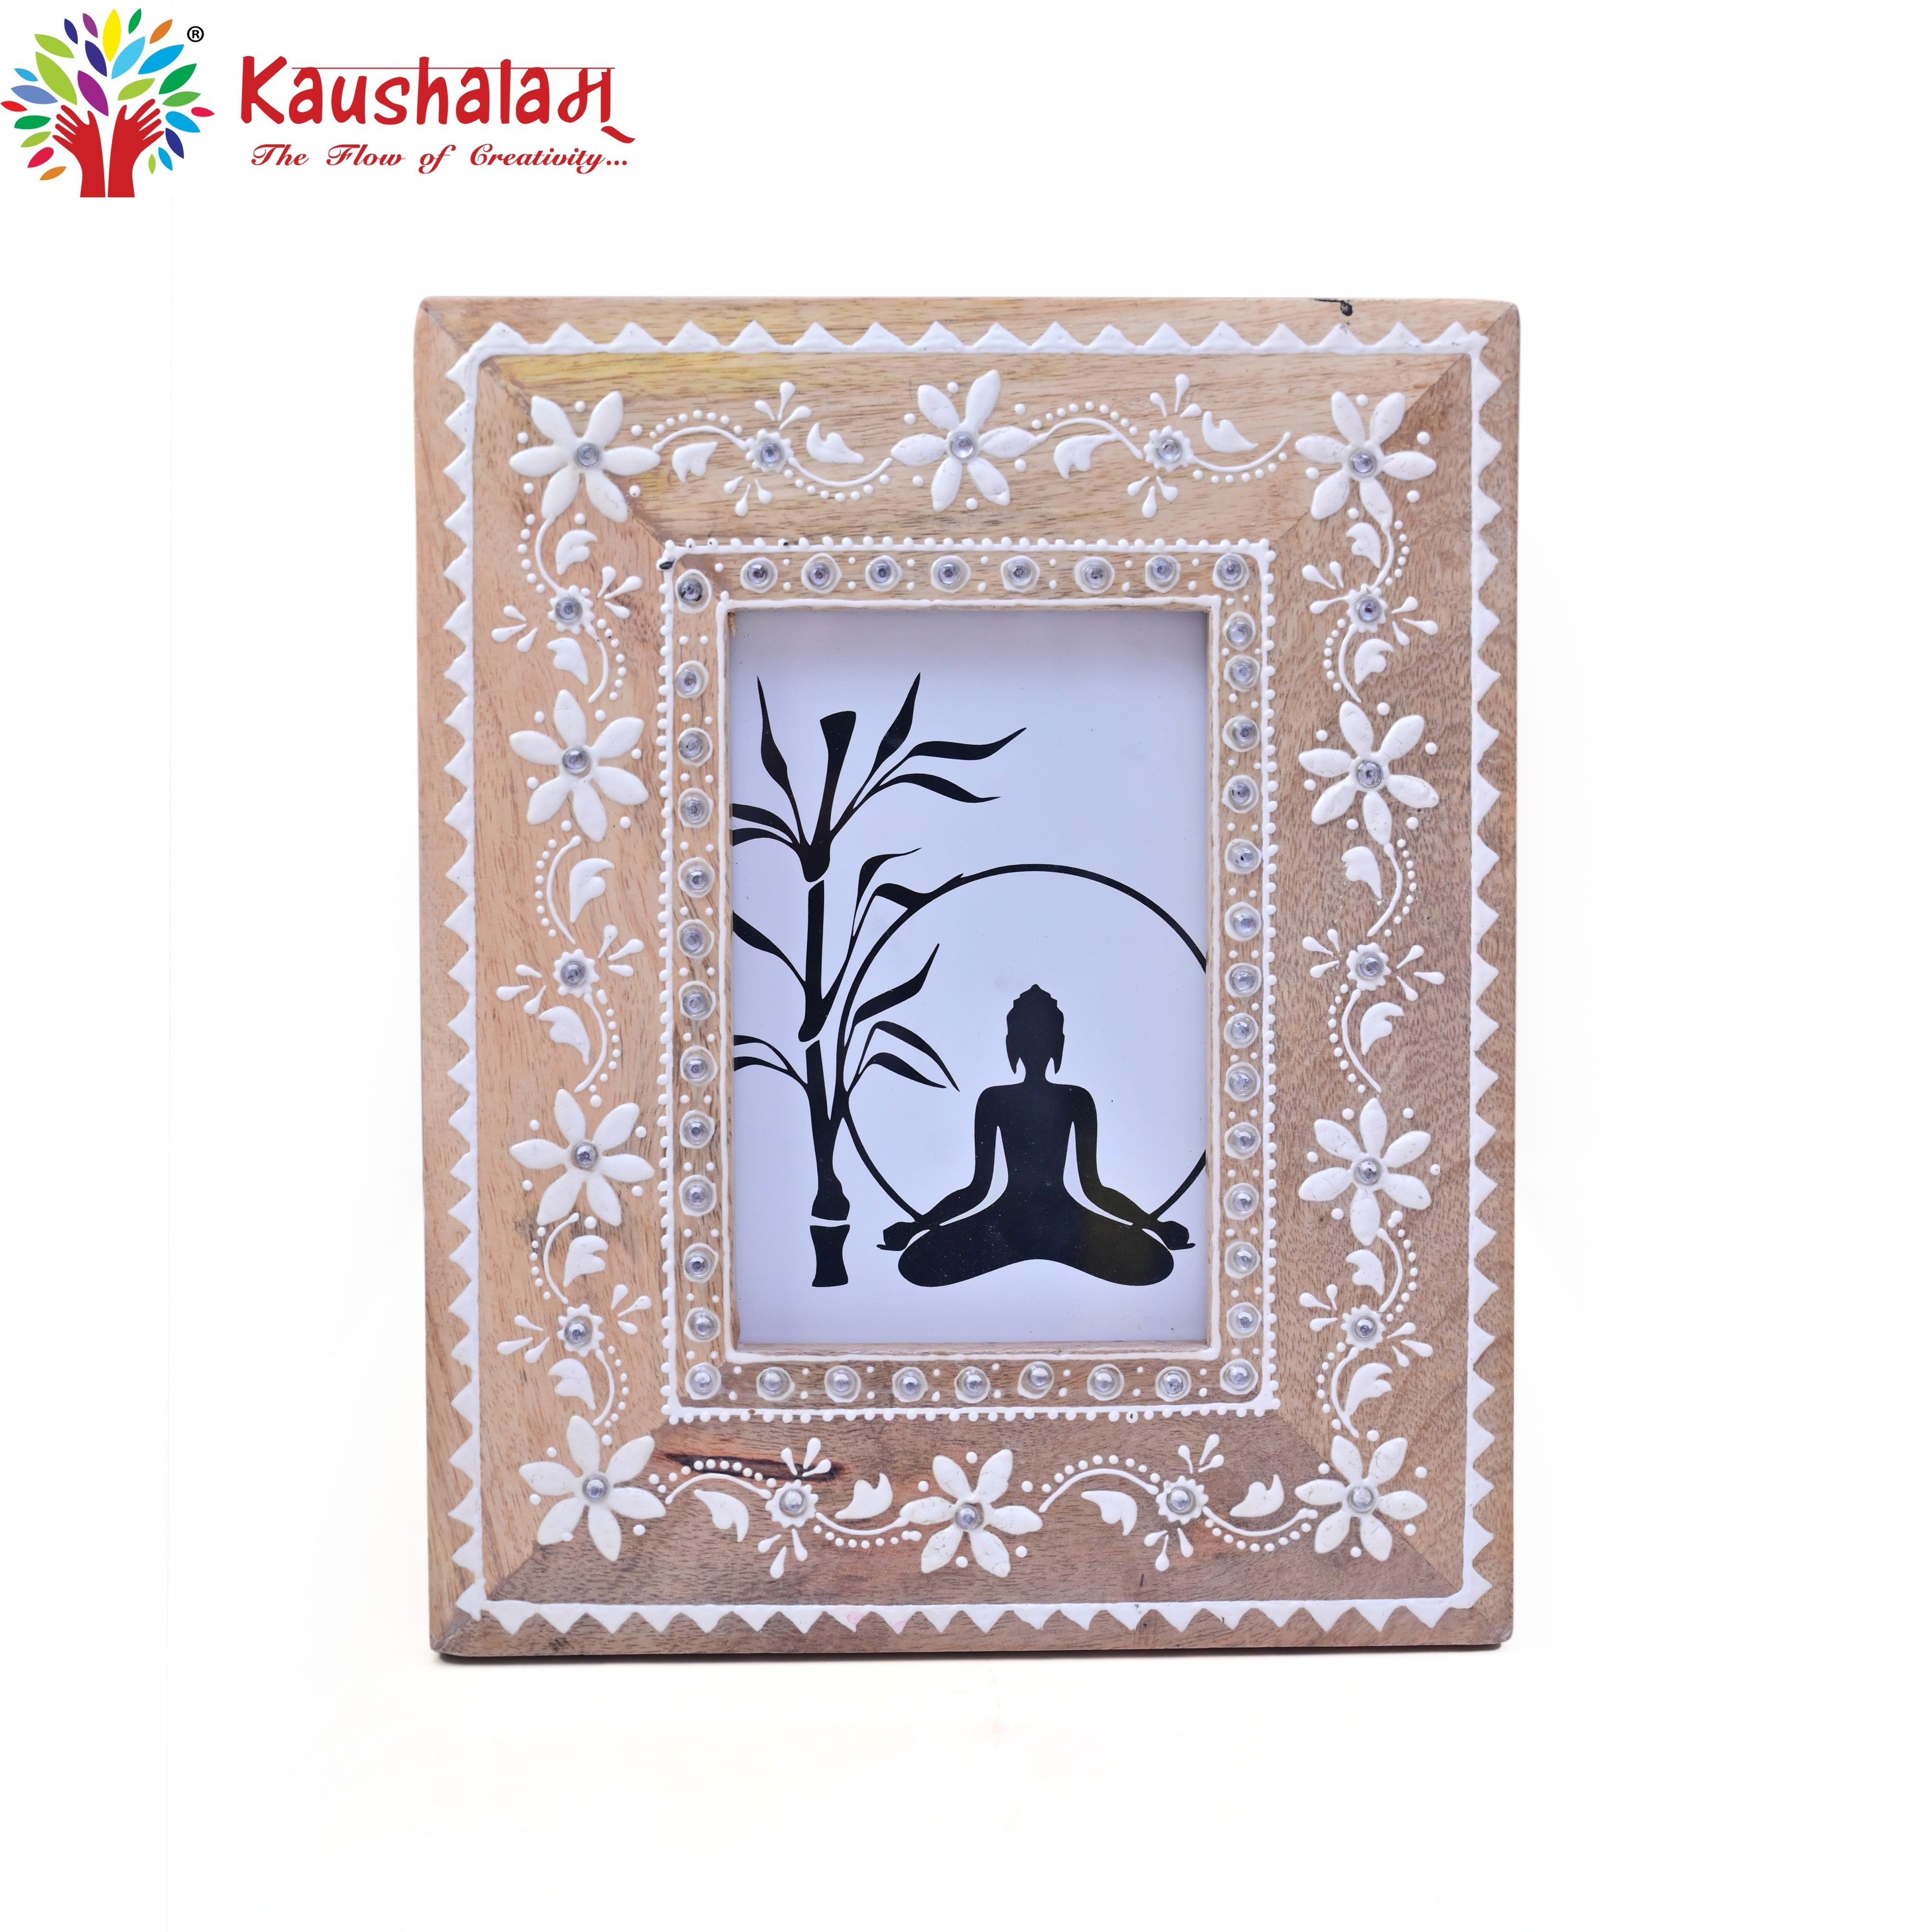 HAND PAINTED PHOTO FRAME